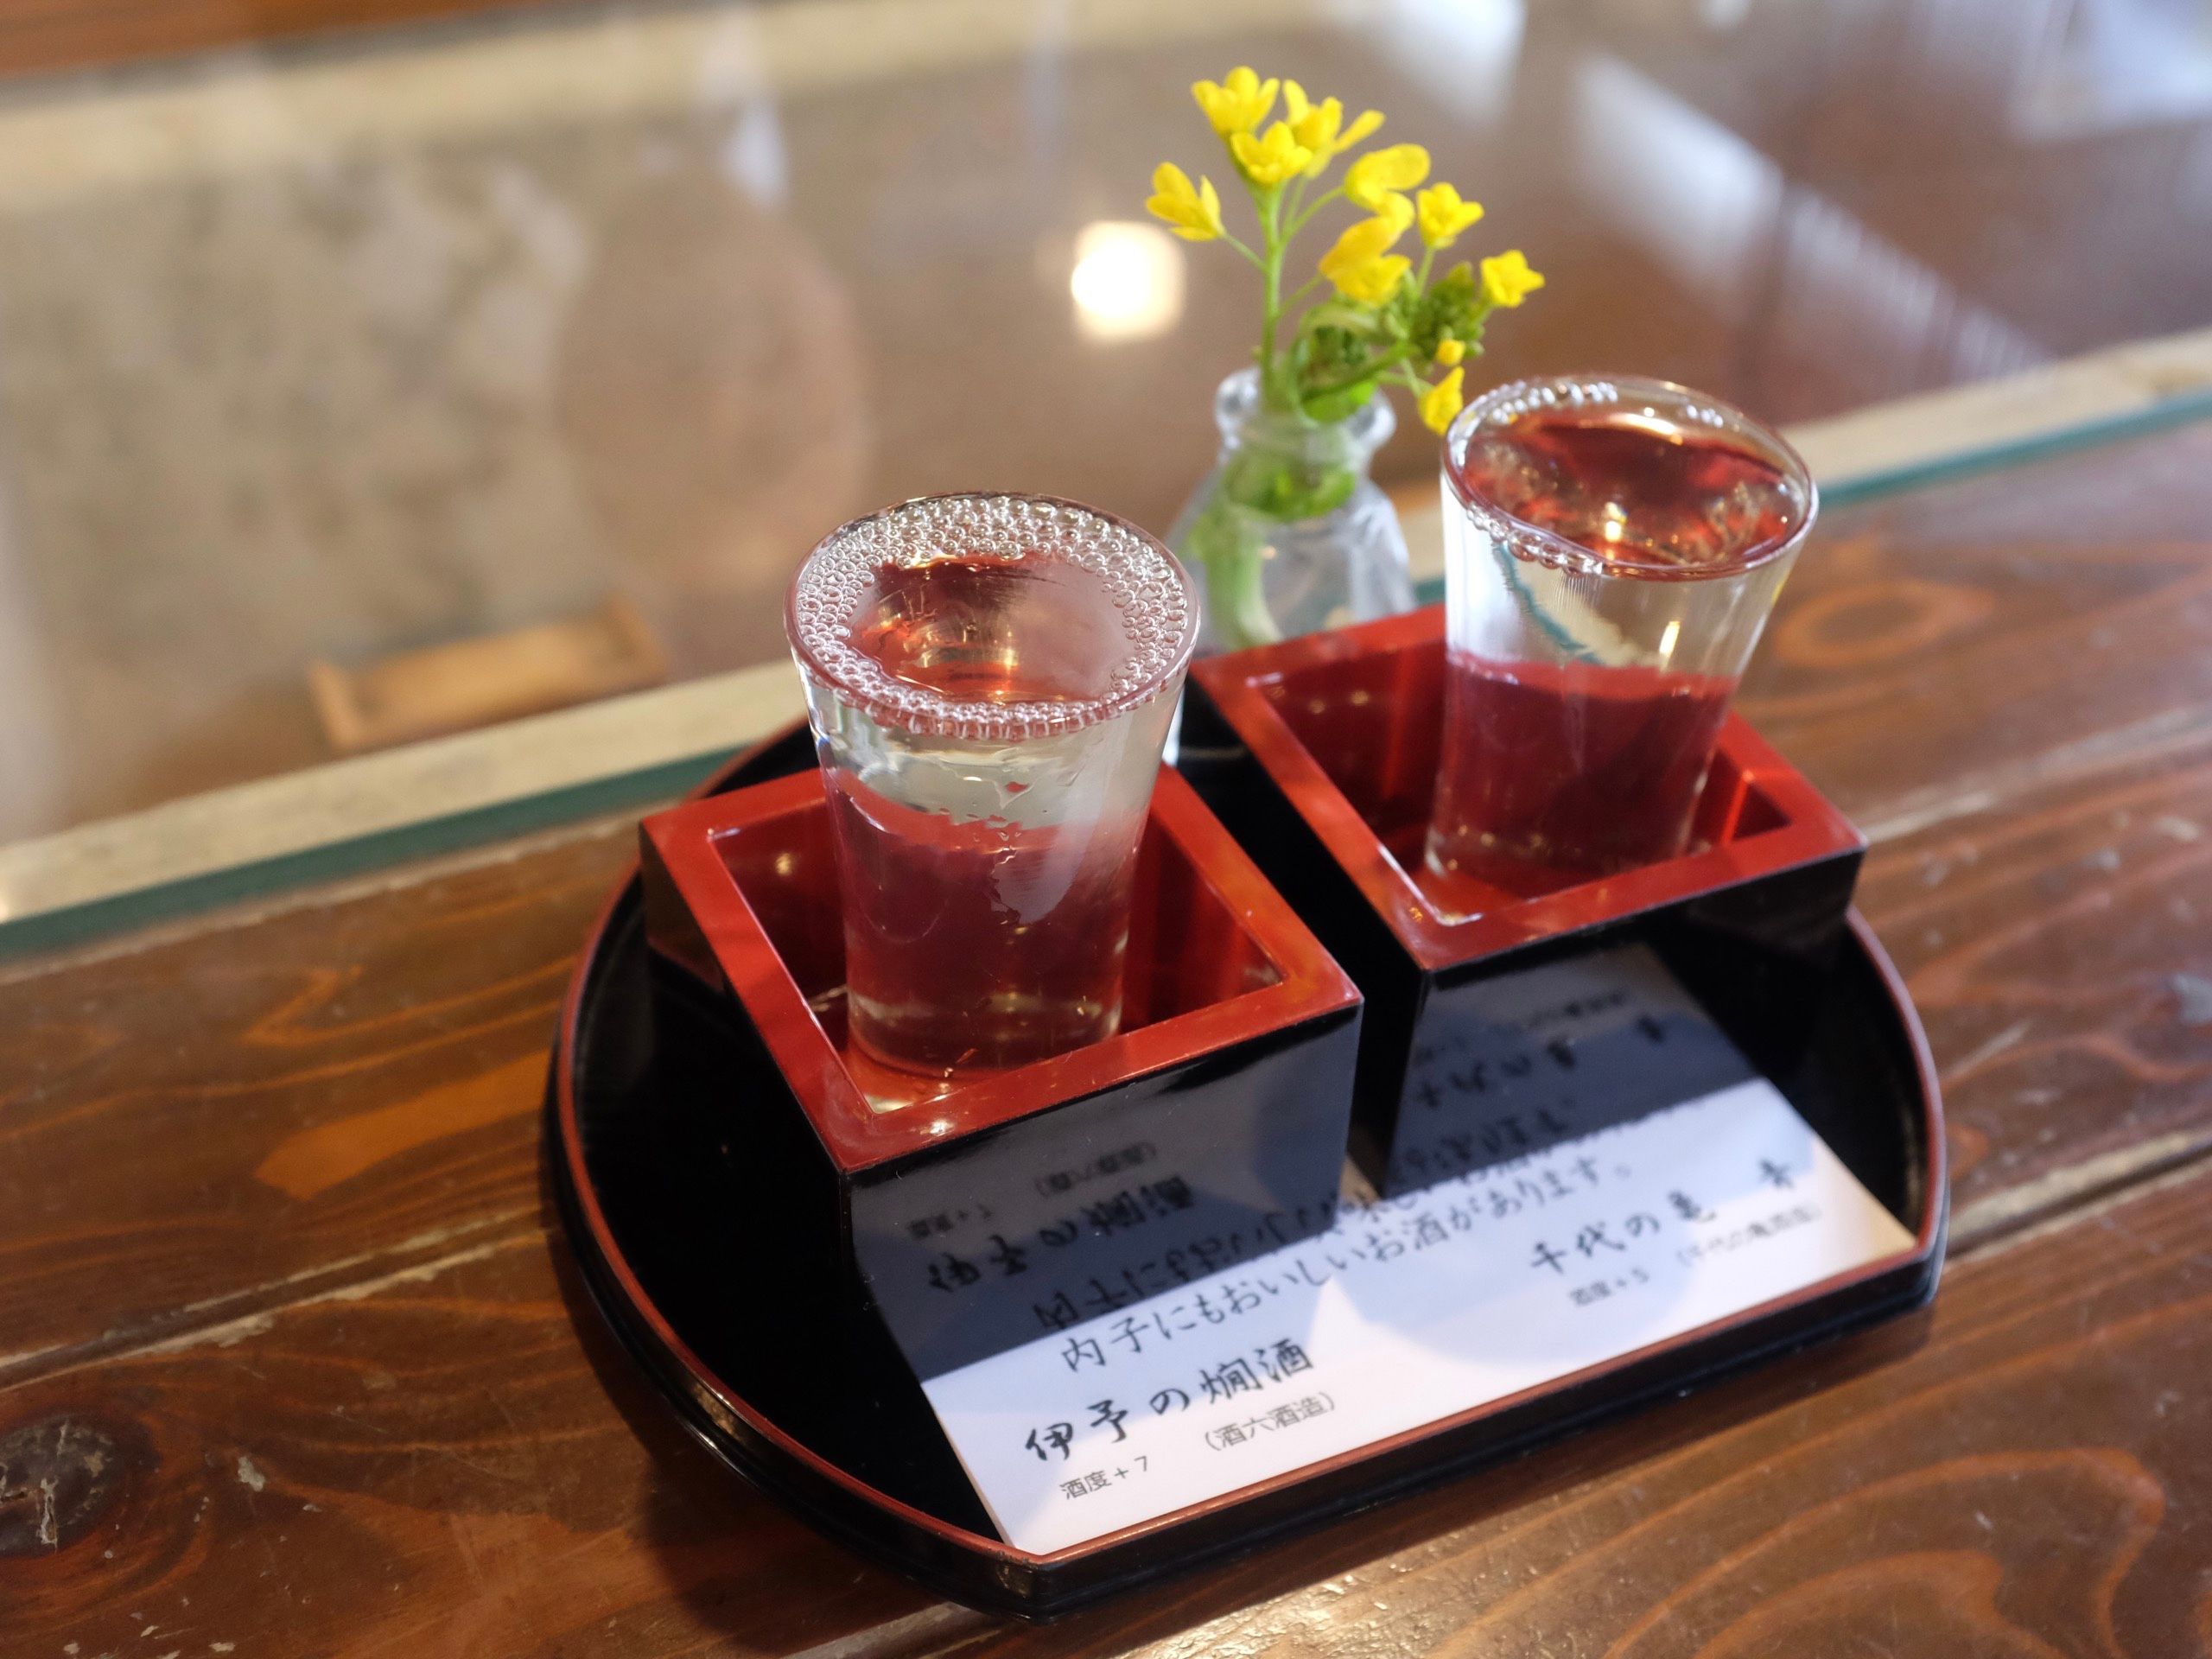 Two glasses of sake served in red and black wooden cups.